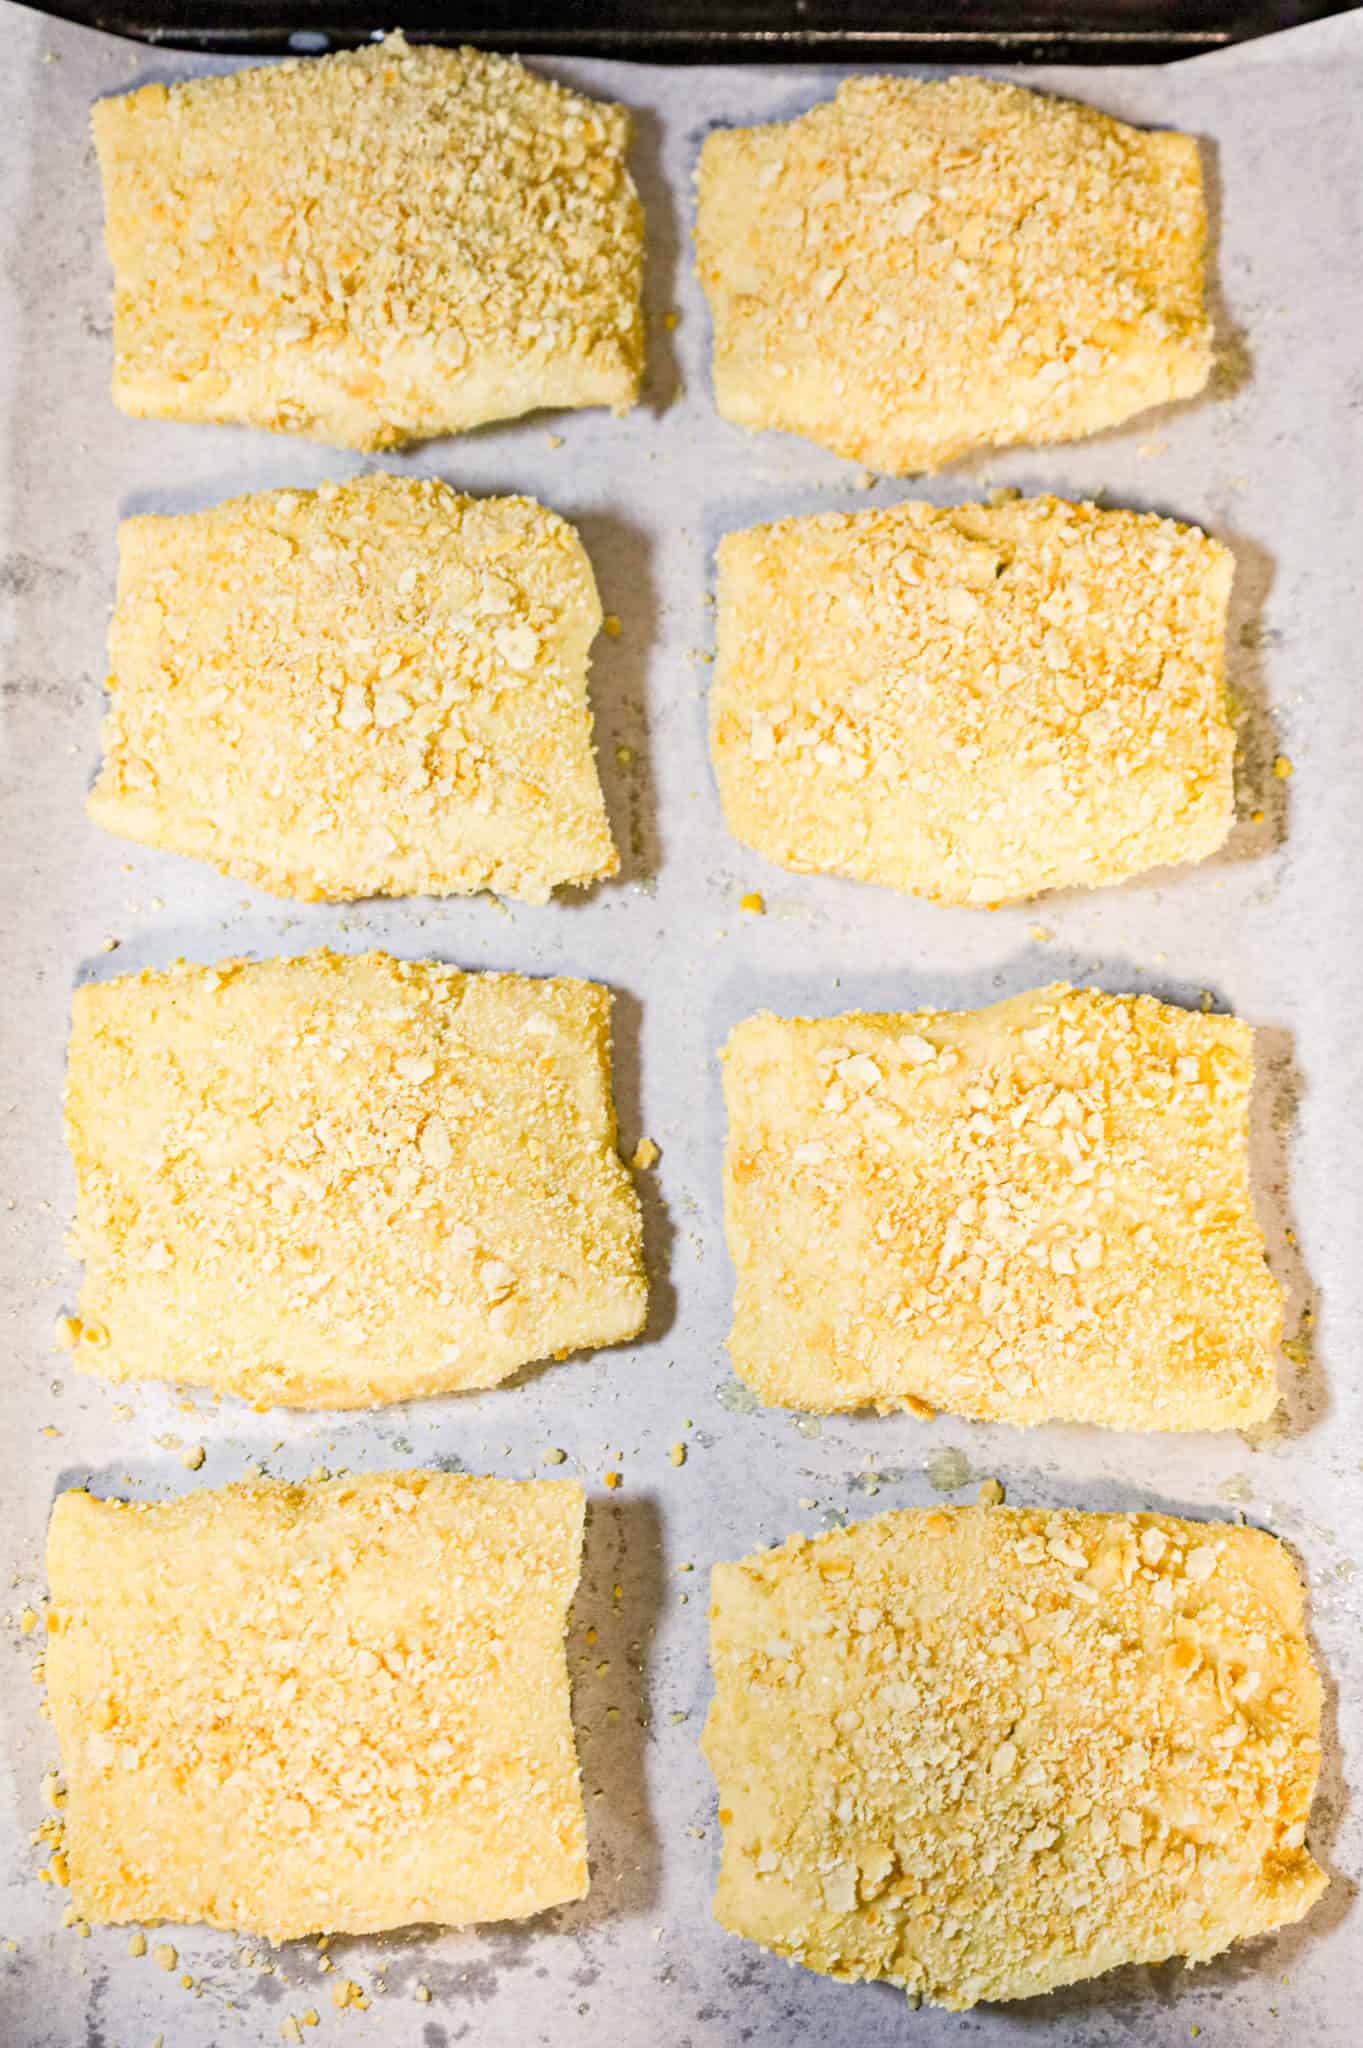 Ritz cracker crumb coated chicken pillows on a parchment lined baking sheet